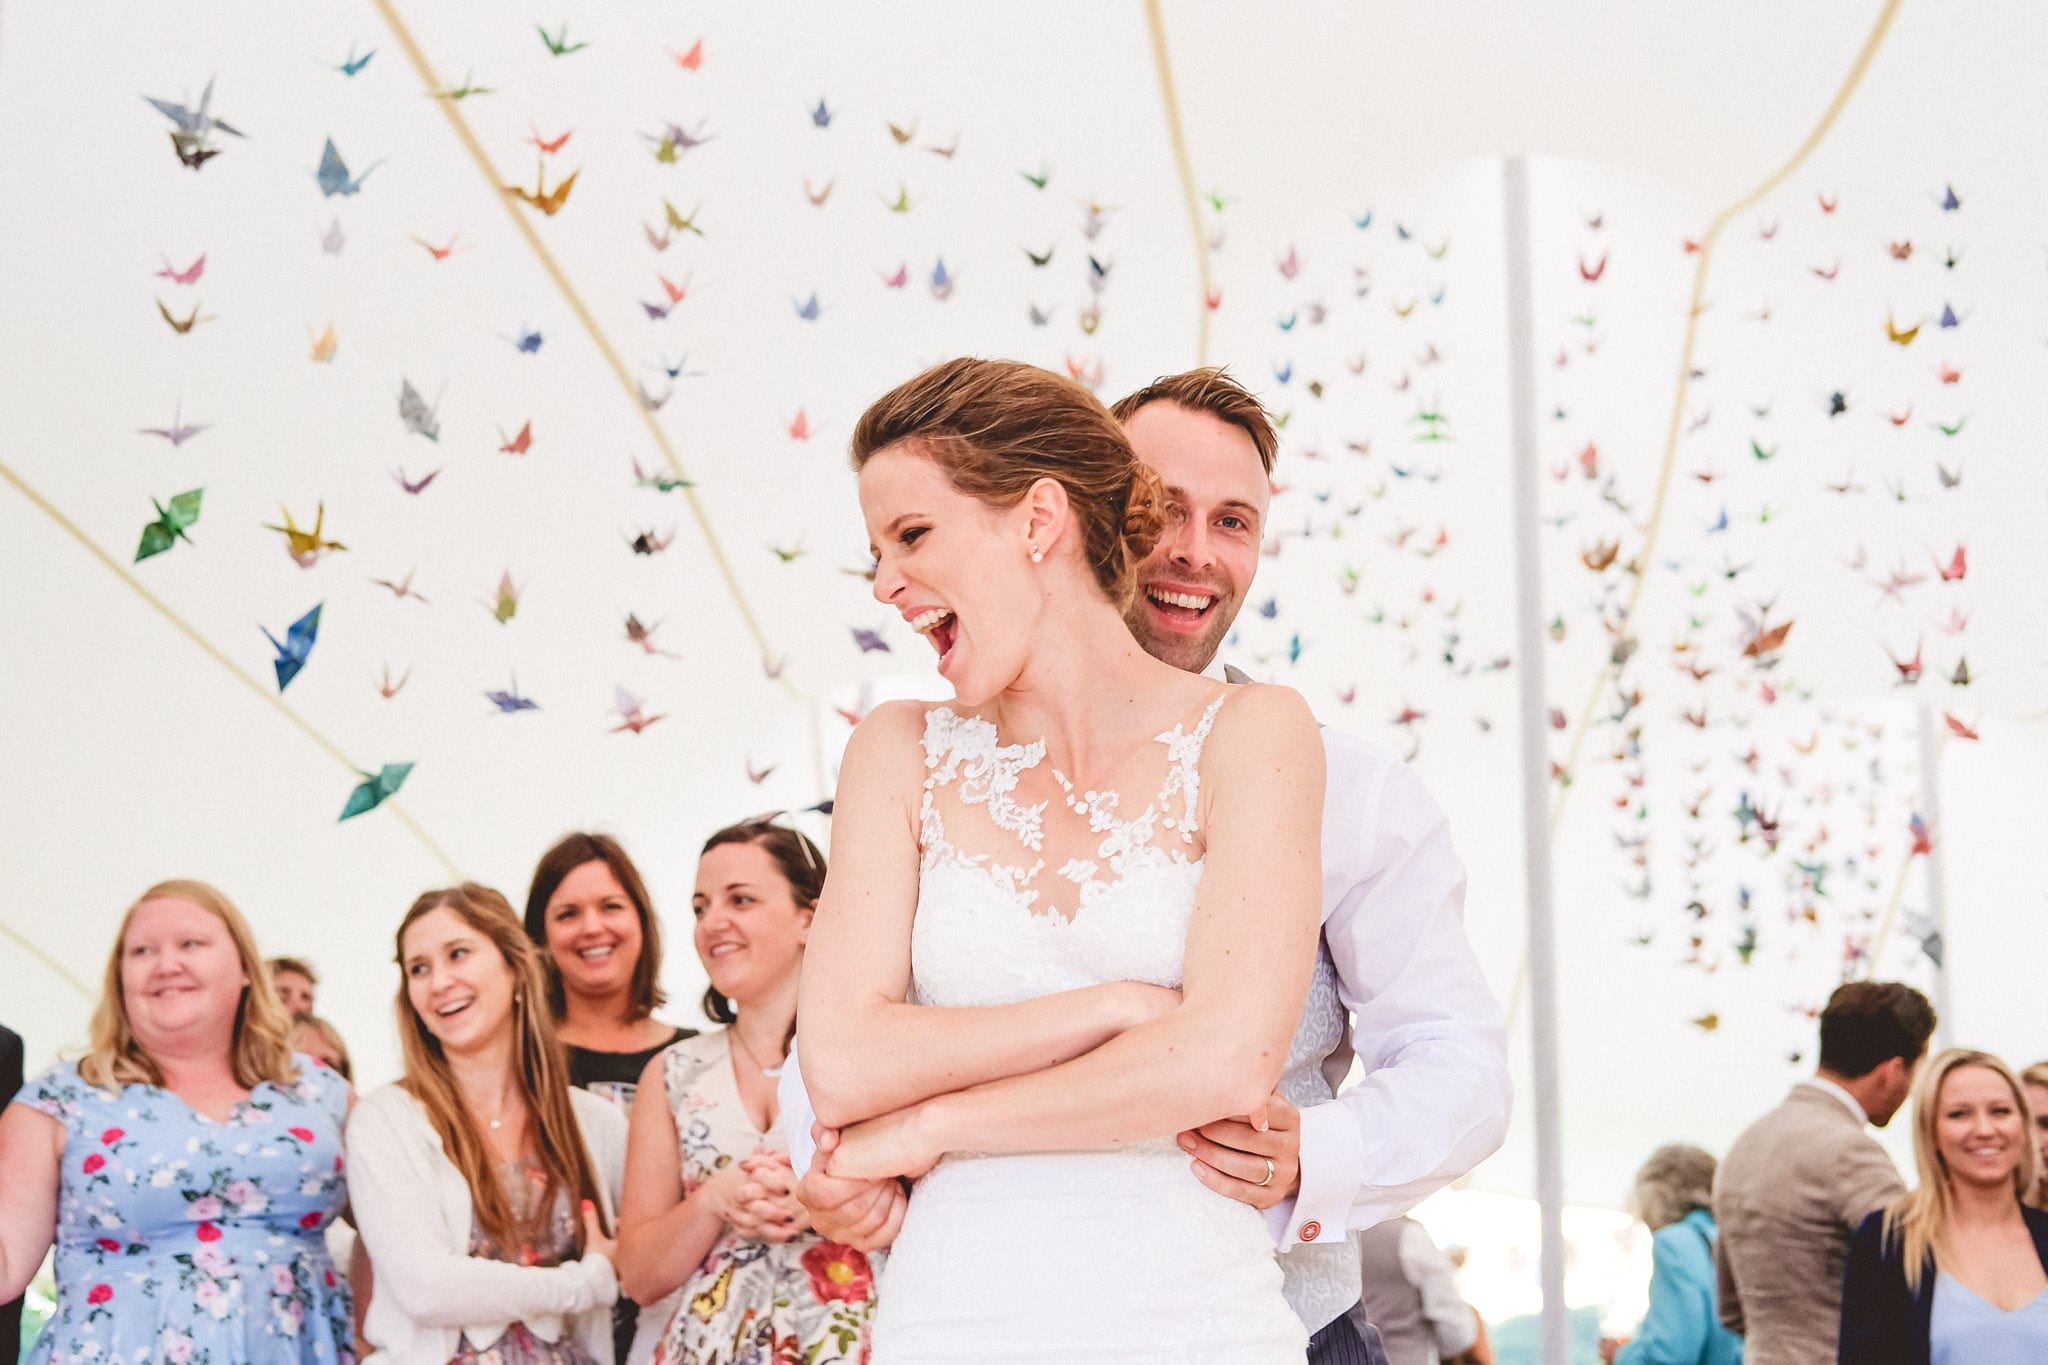 Bride and groom first dance in a marquee wedding